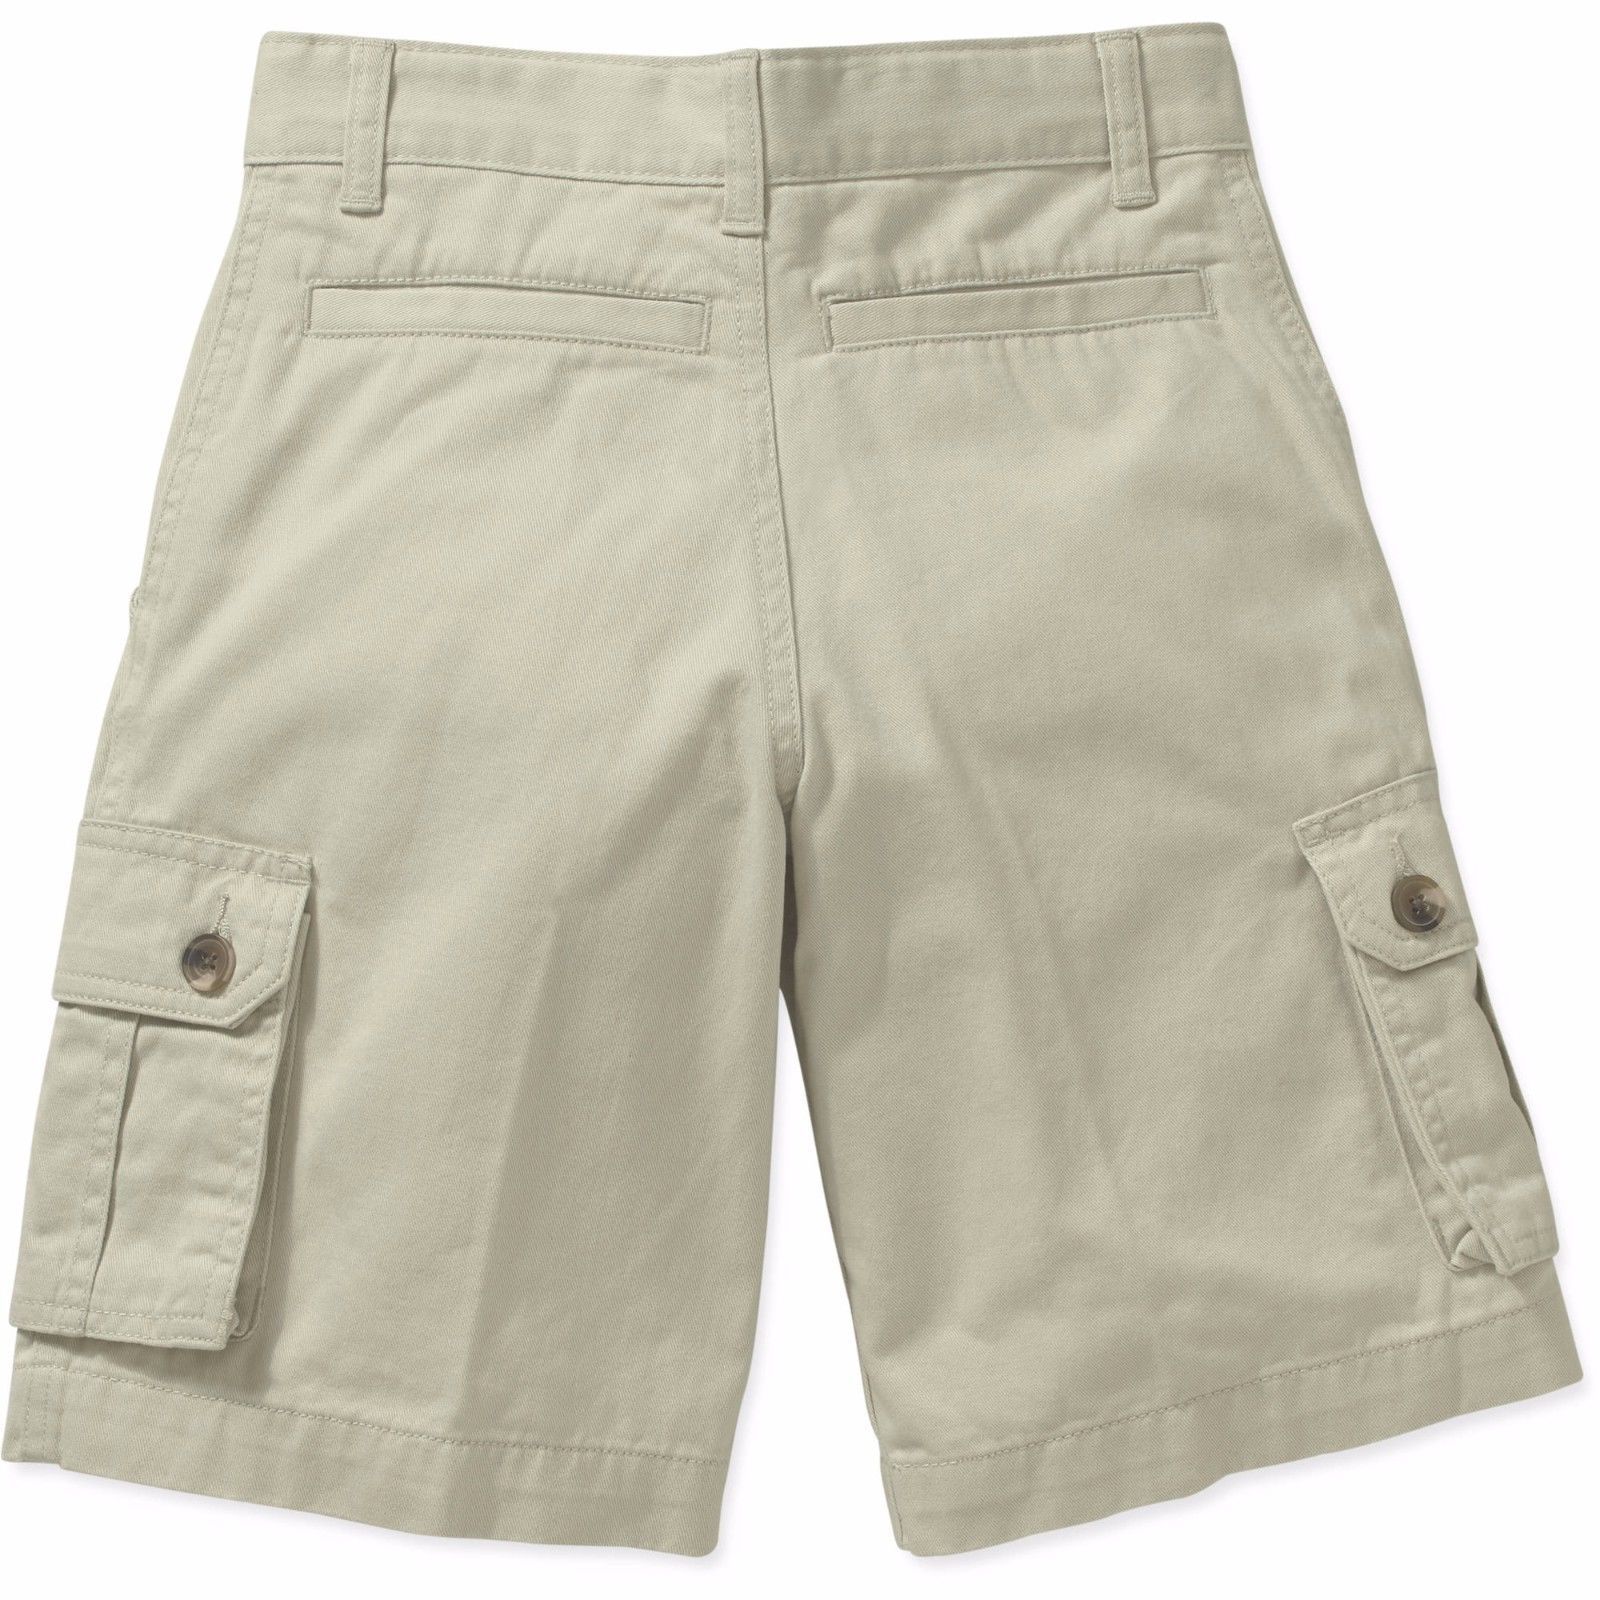 Faded Glory Boys Solid Cargo Shorts Sidewalk Color Size 6 NEW - Shorts